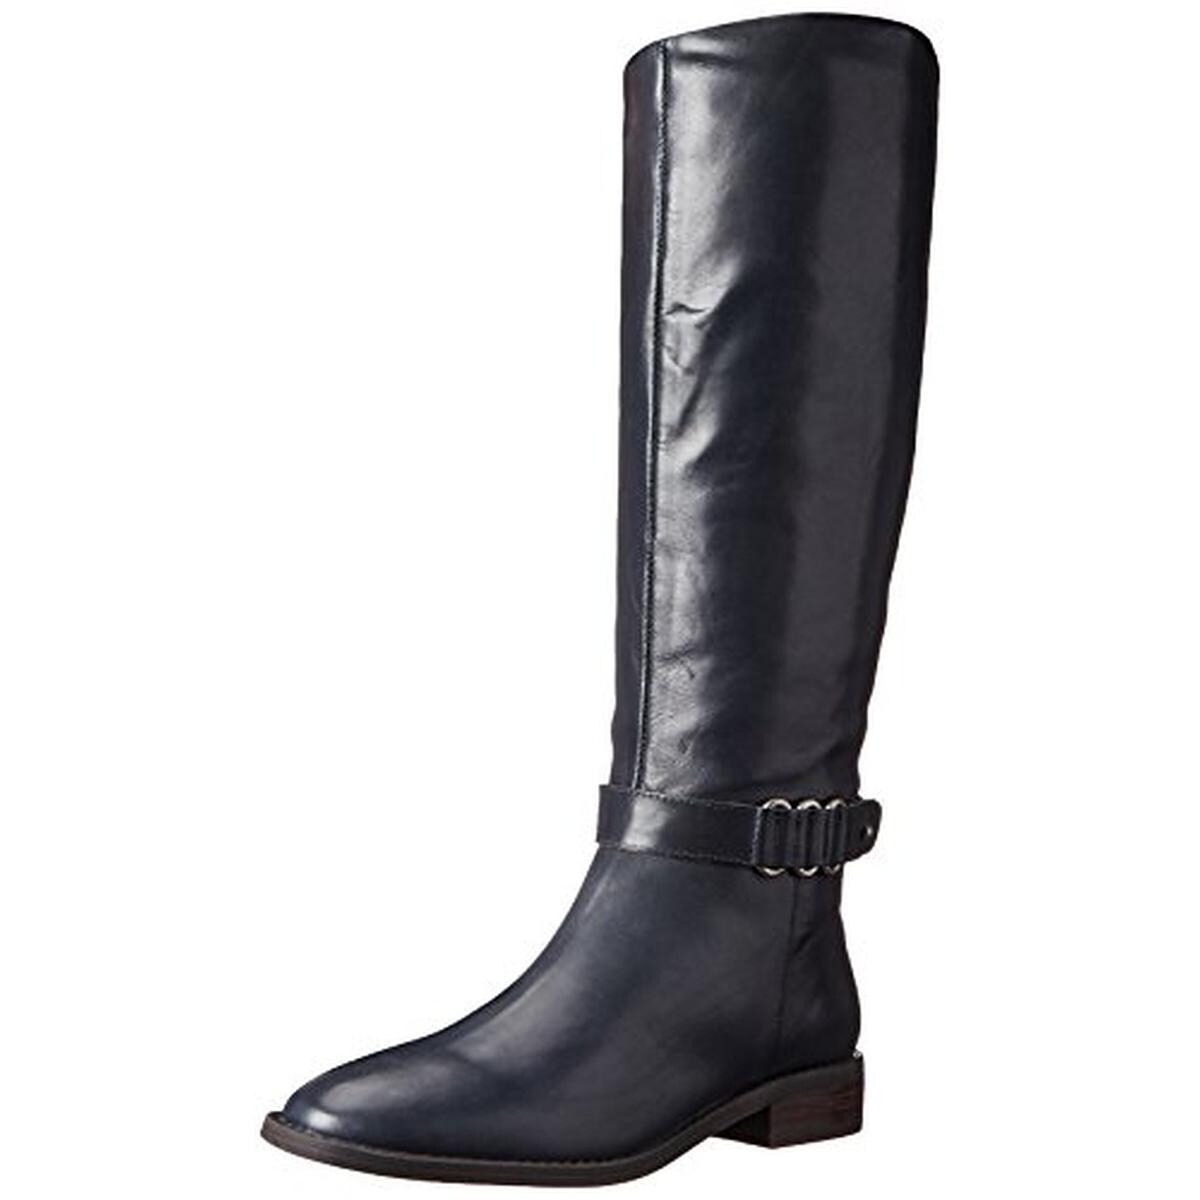 9 west riding boots